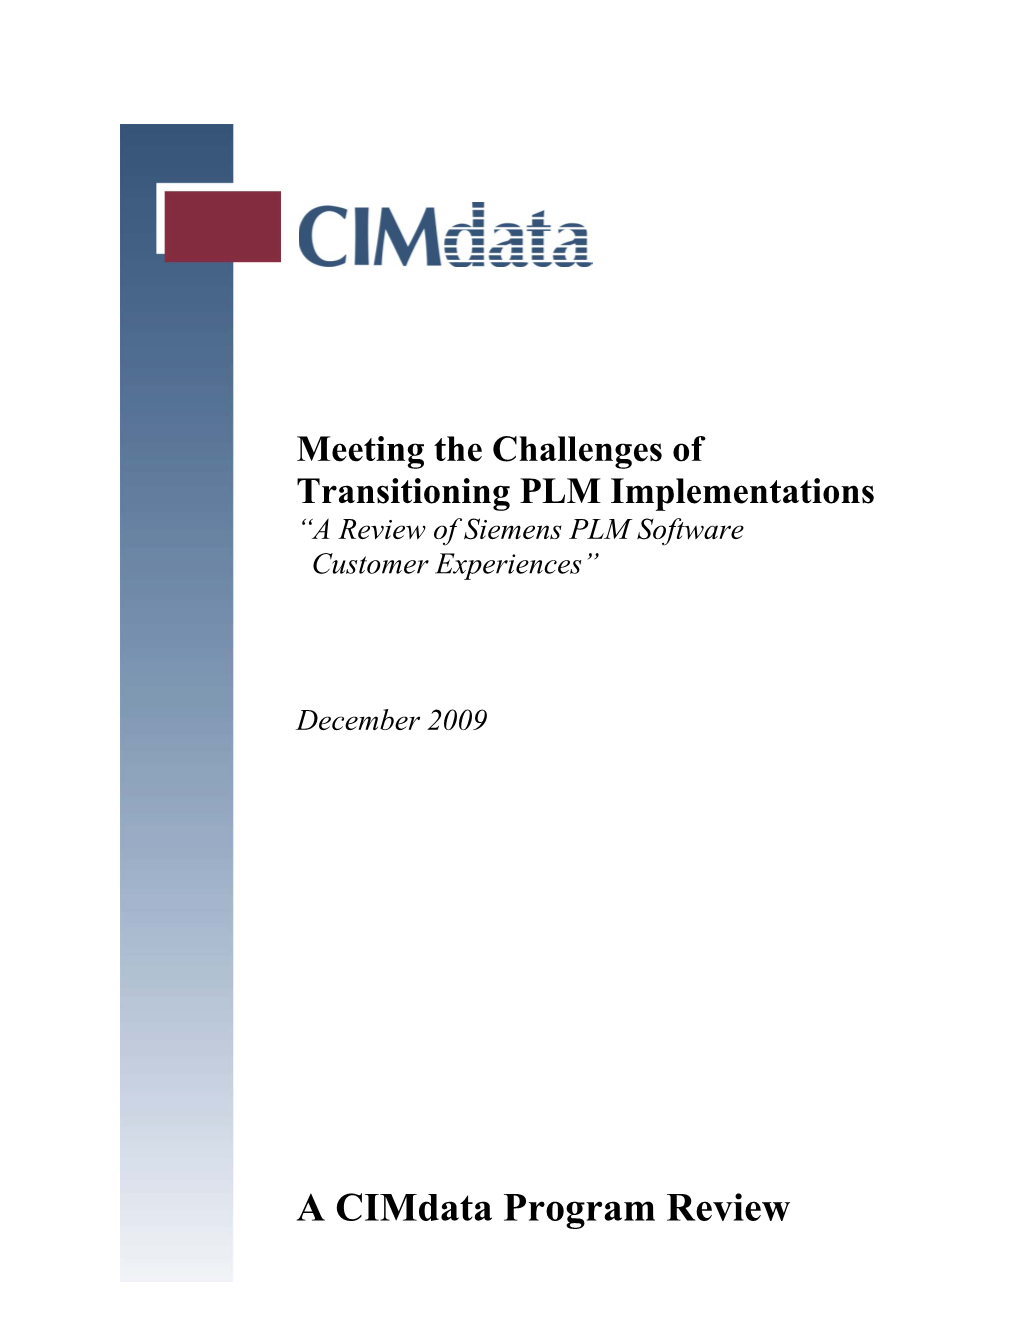 Meeting the Challenges of Transitioning PLM Implementations “A Review of Siemens PLM Software Customer Experiences”